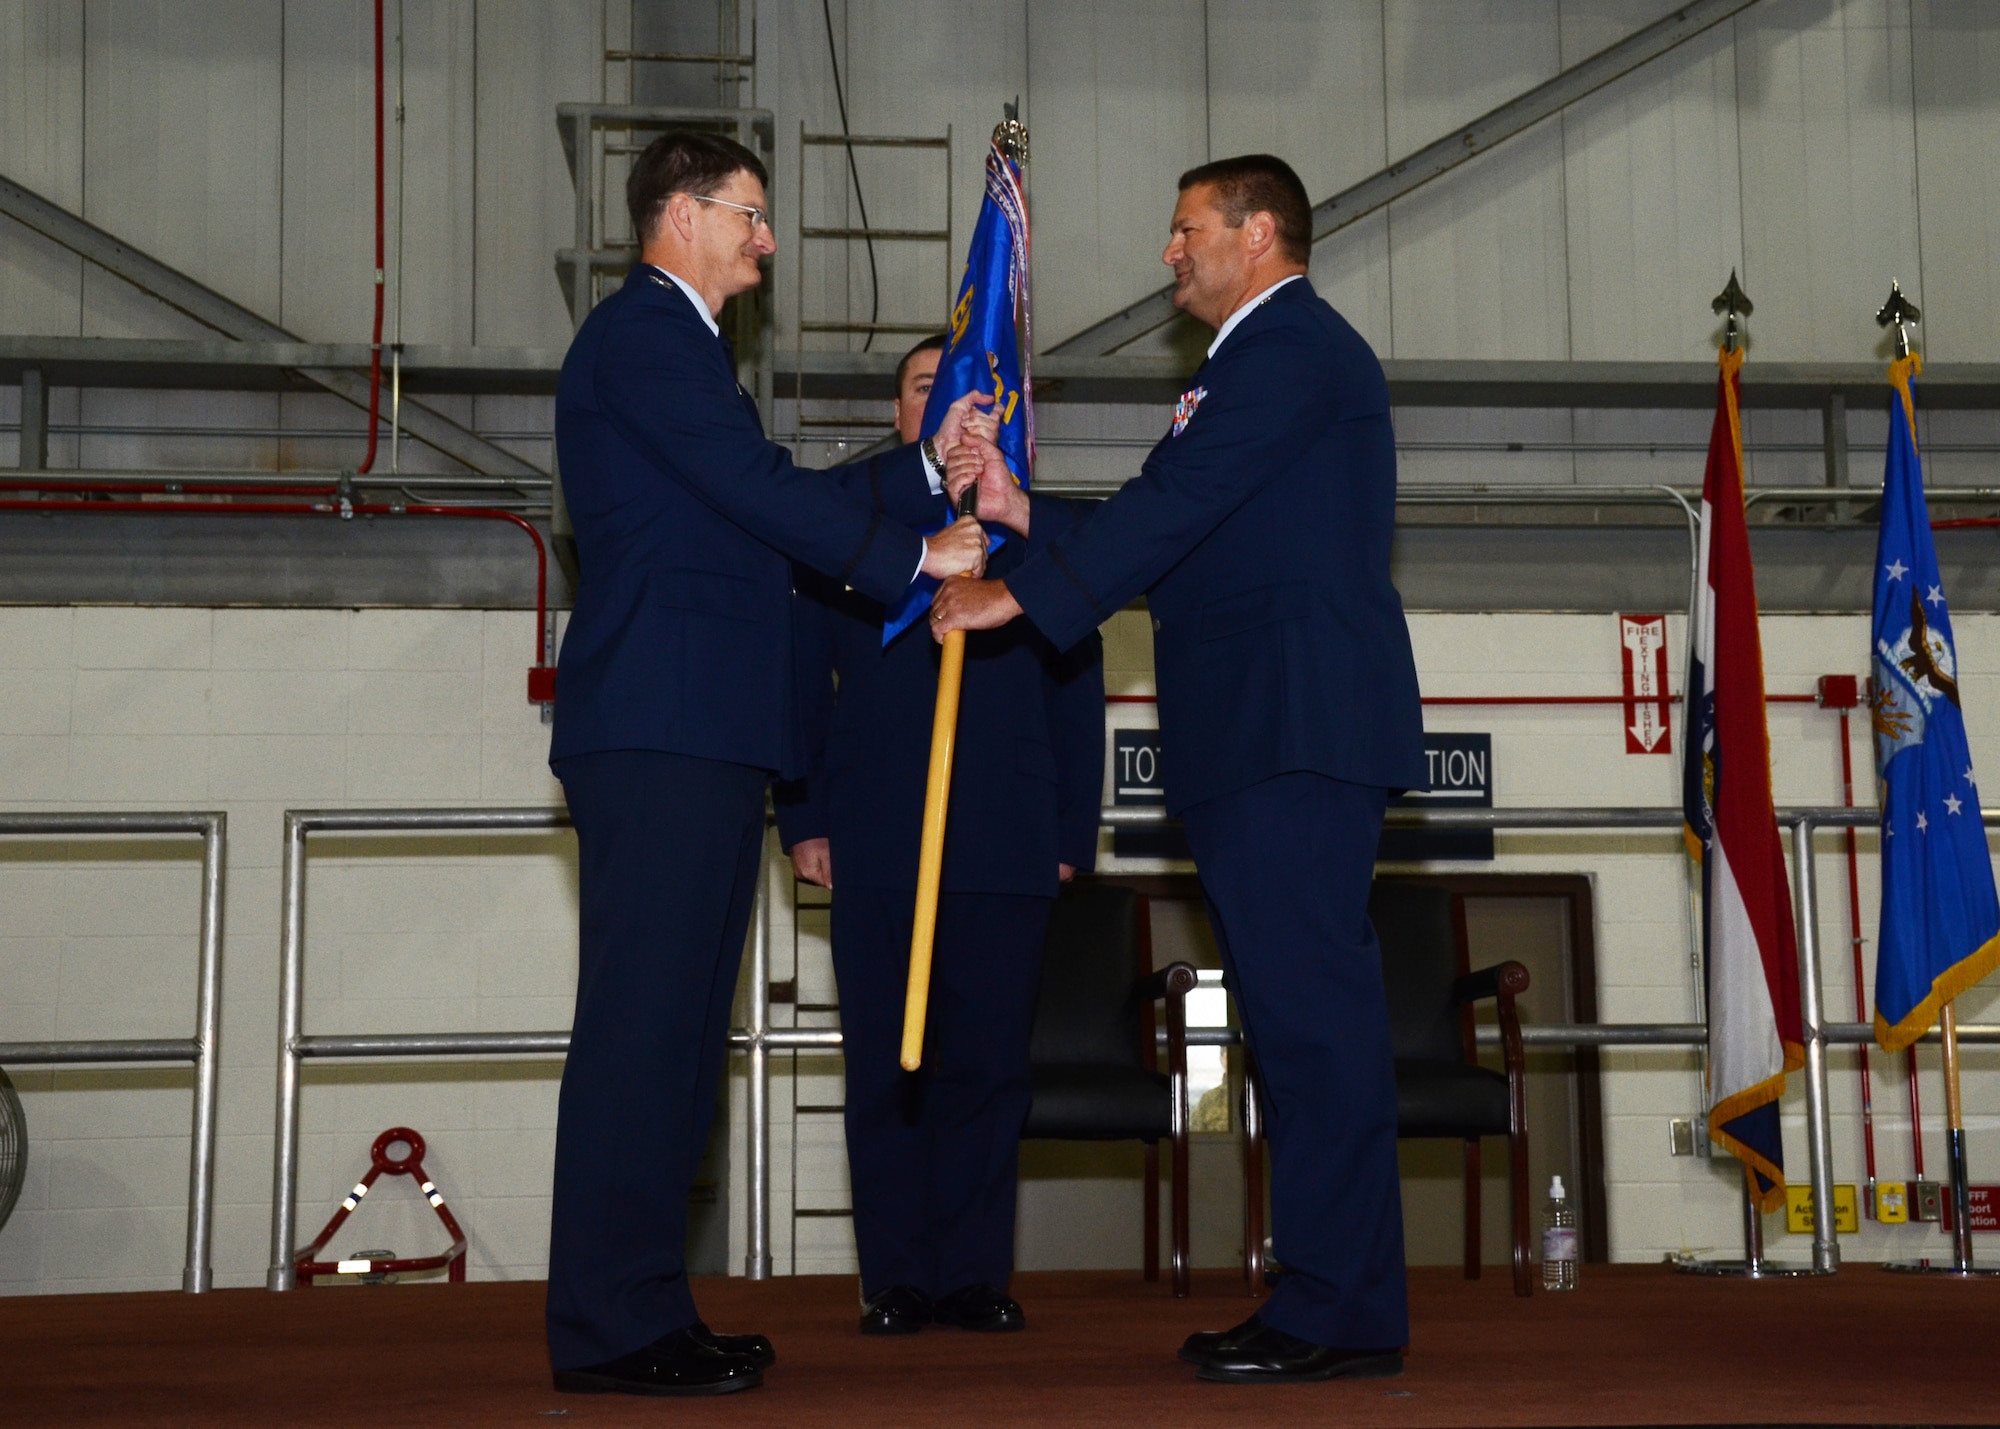 Lt. Col. Michael Jurries accepts the 131st Mission Support Group guidon from Col. Michael Francis, 131st Bomb Wing Commander, during Jurries's Assumption of Command ceremony at Whiteman Air Force Base, Mo., Dec. 7, 2014.

(U.S. Air National Guard photo by Airman 1st Class Halley Burgess)